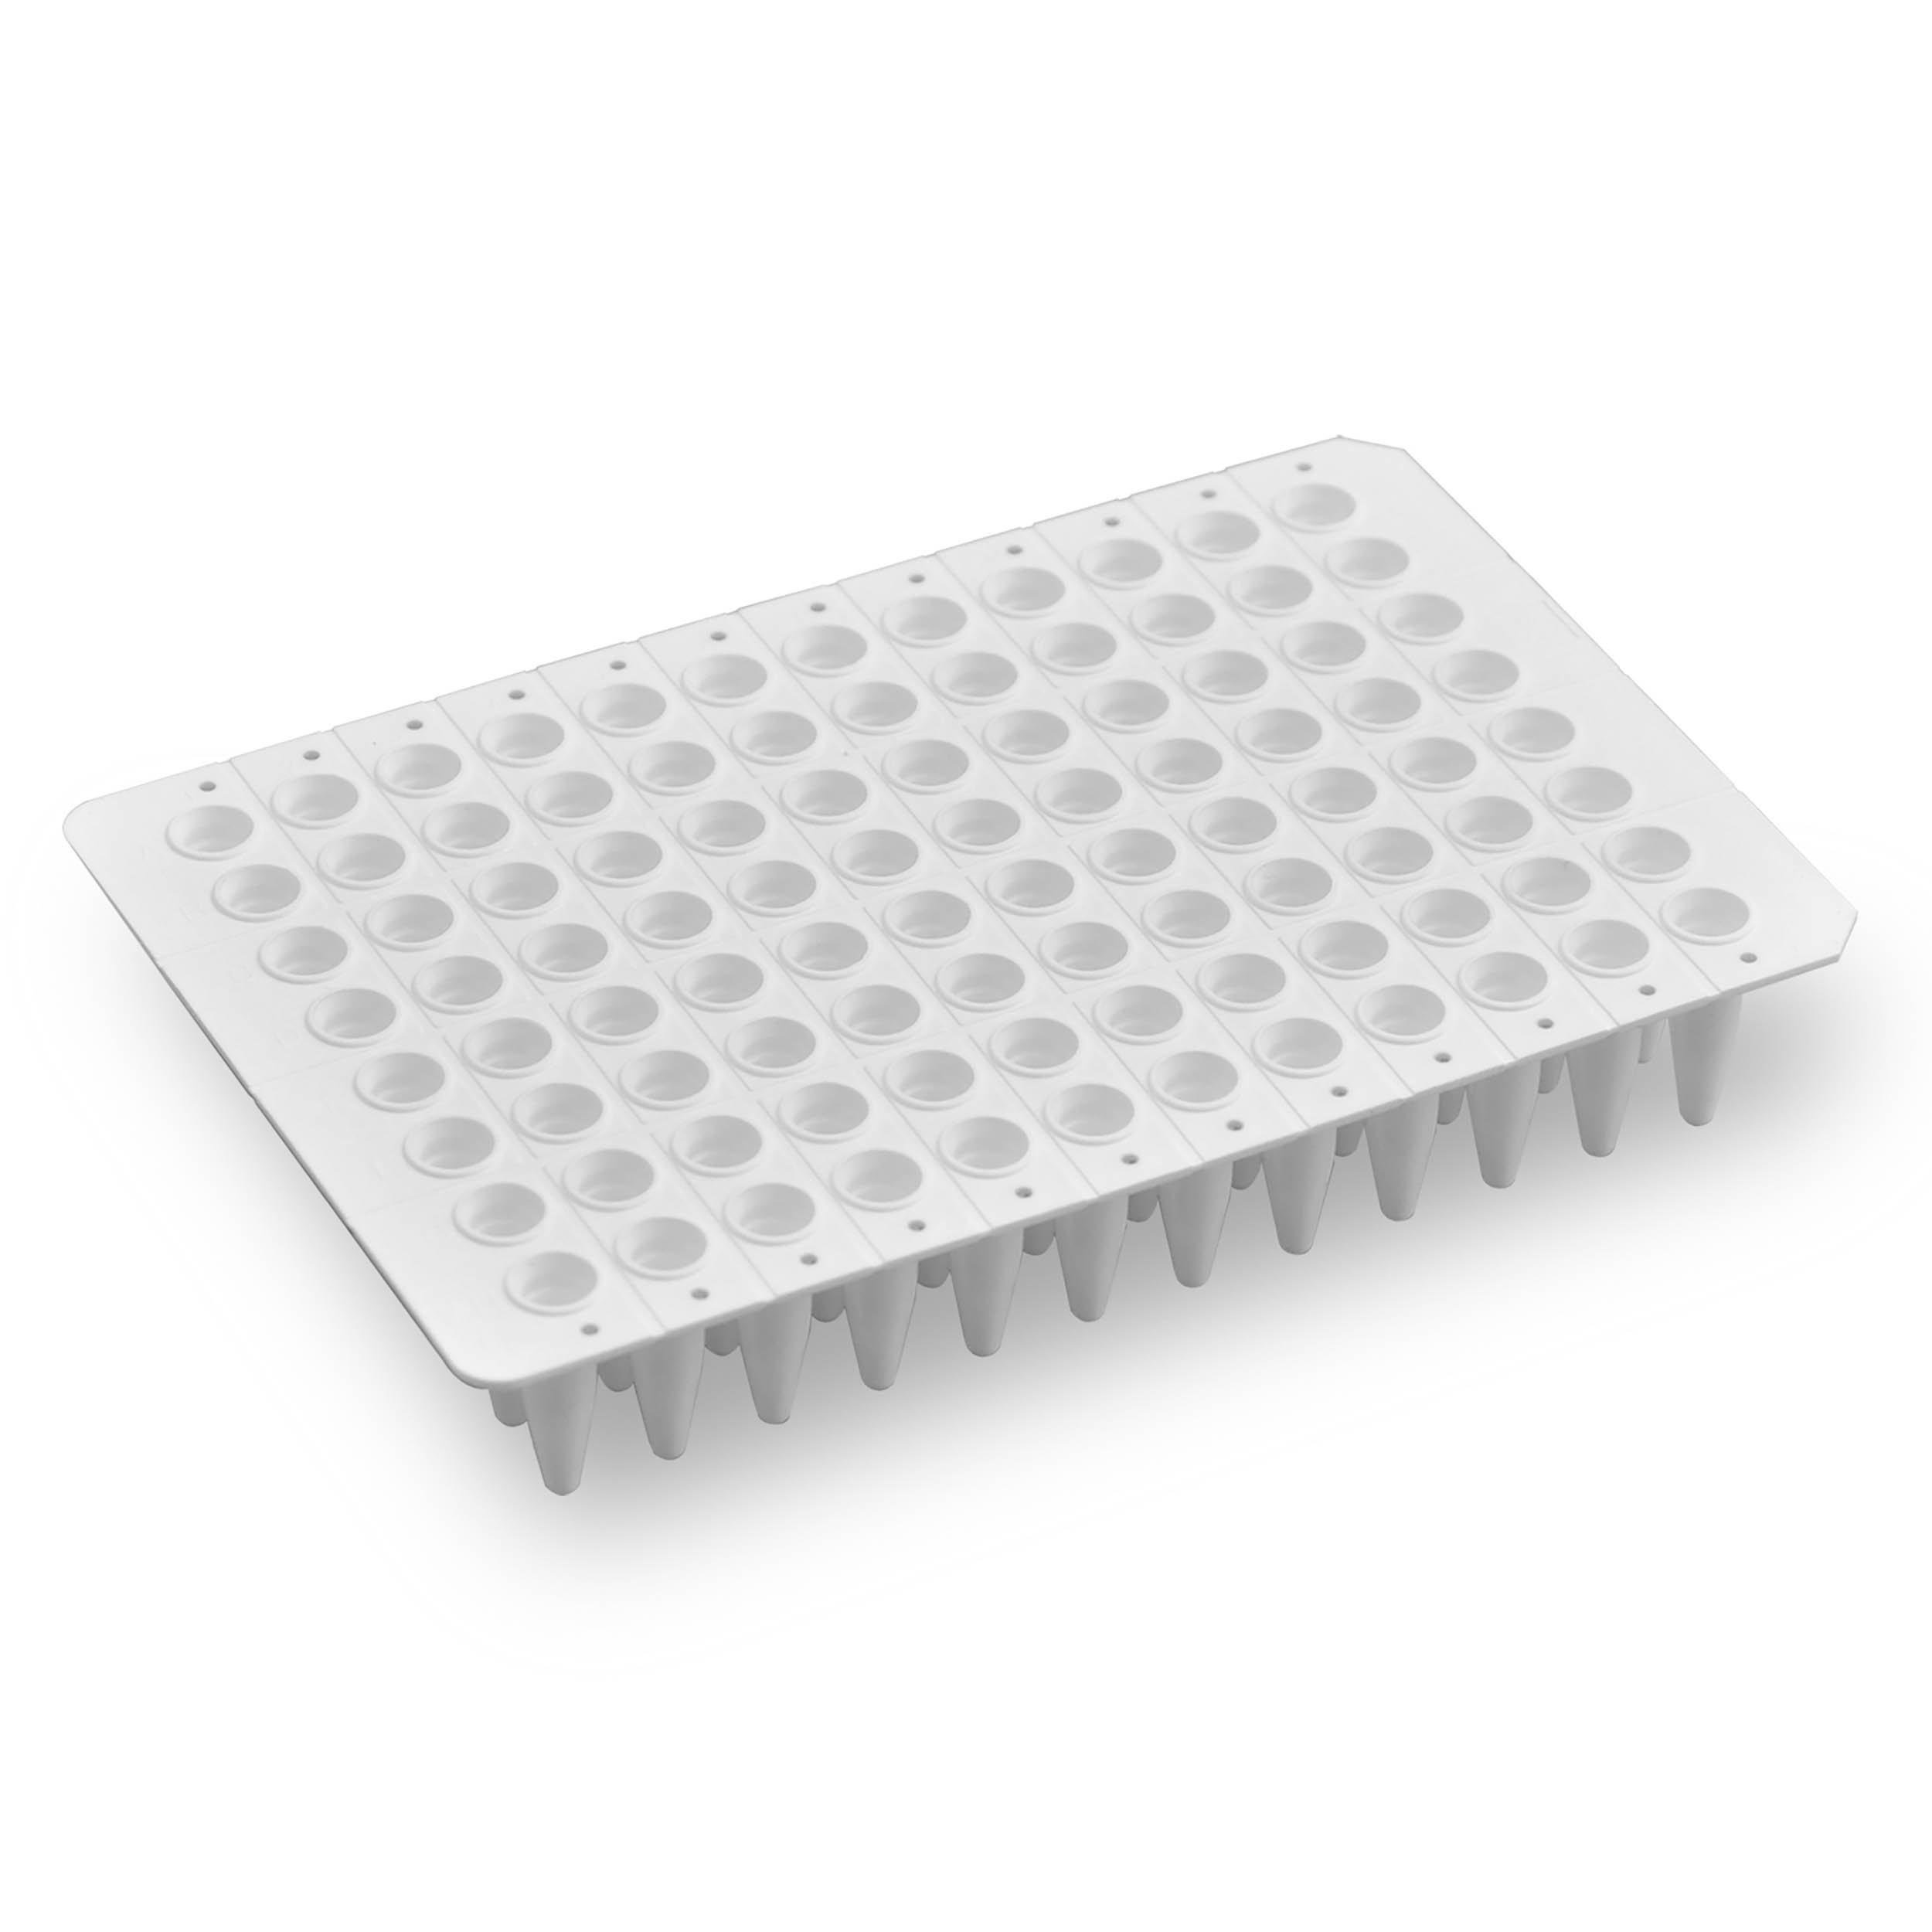 PureAmp 96-Well x 0.2mL PCR Plates - Non Skirted, White (Pack of 50)